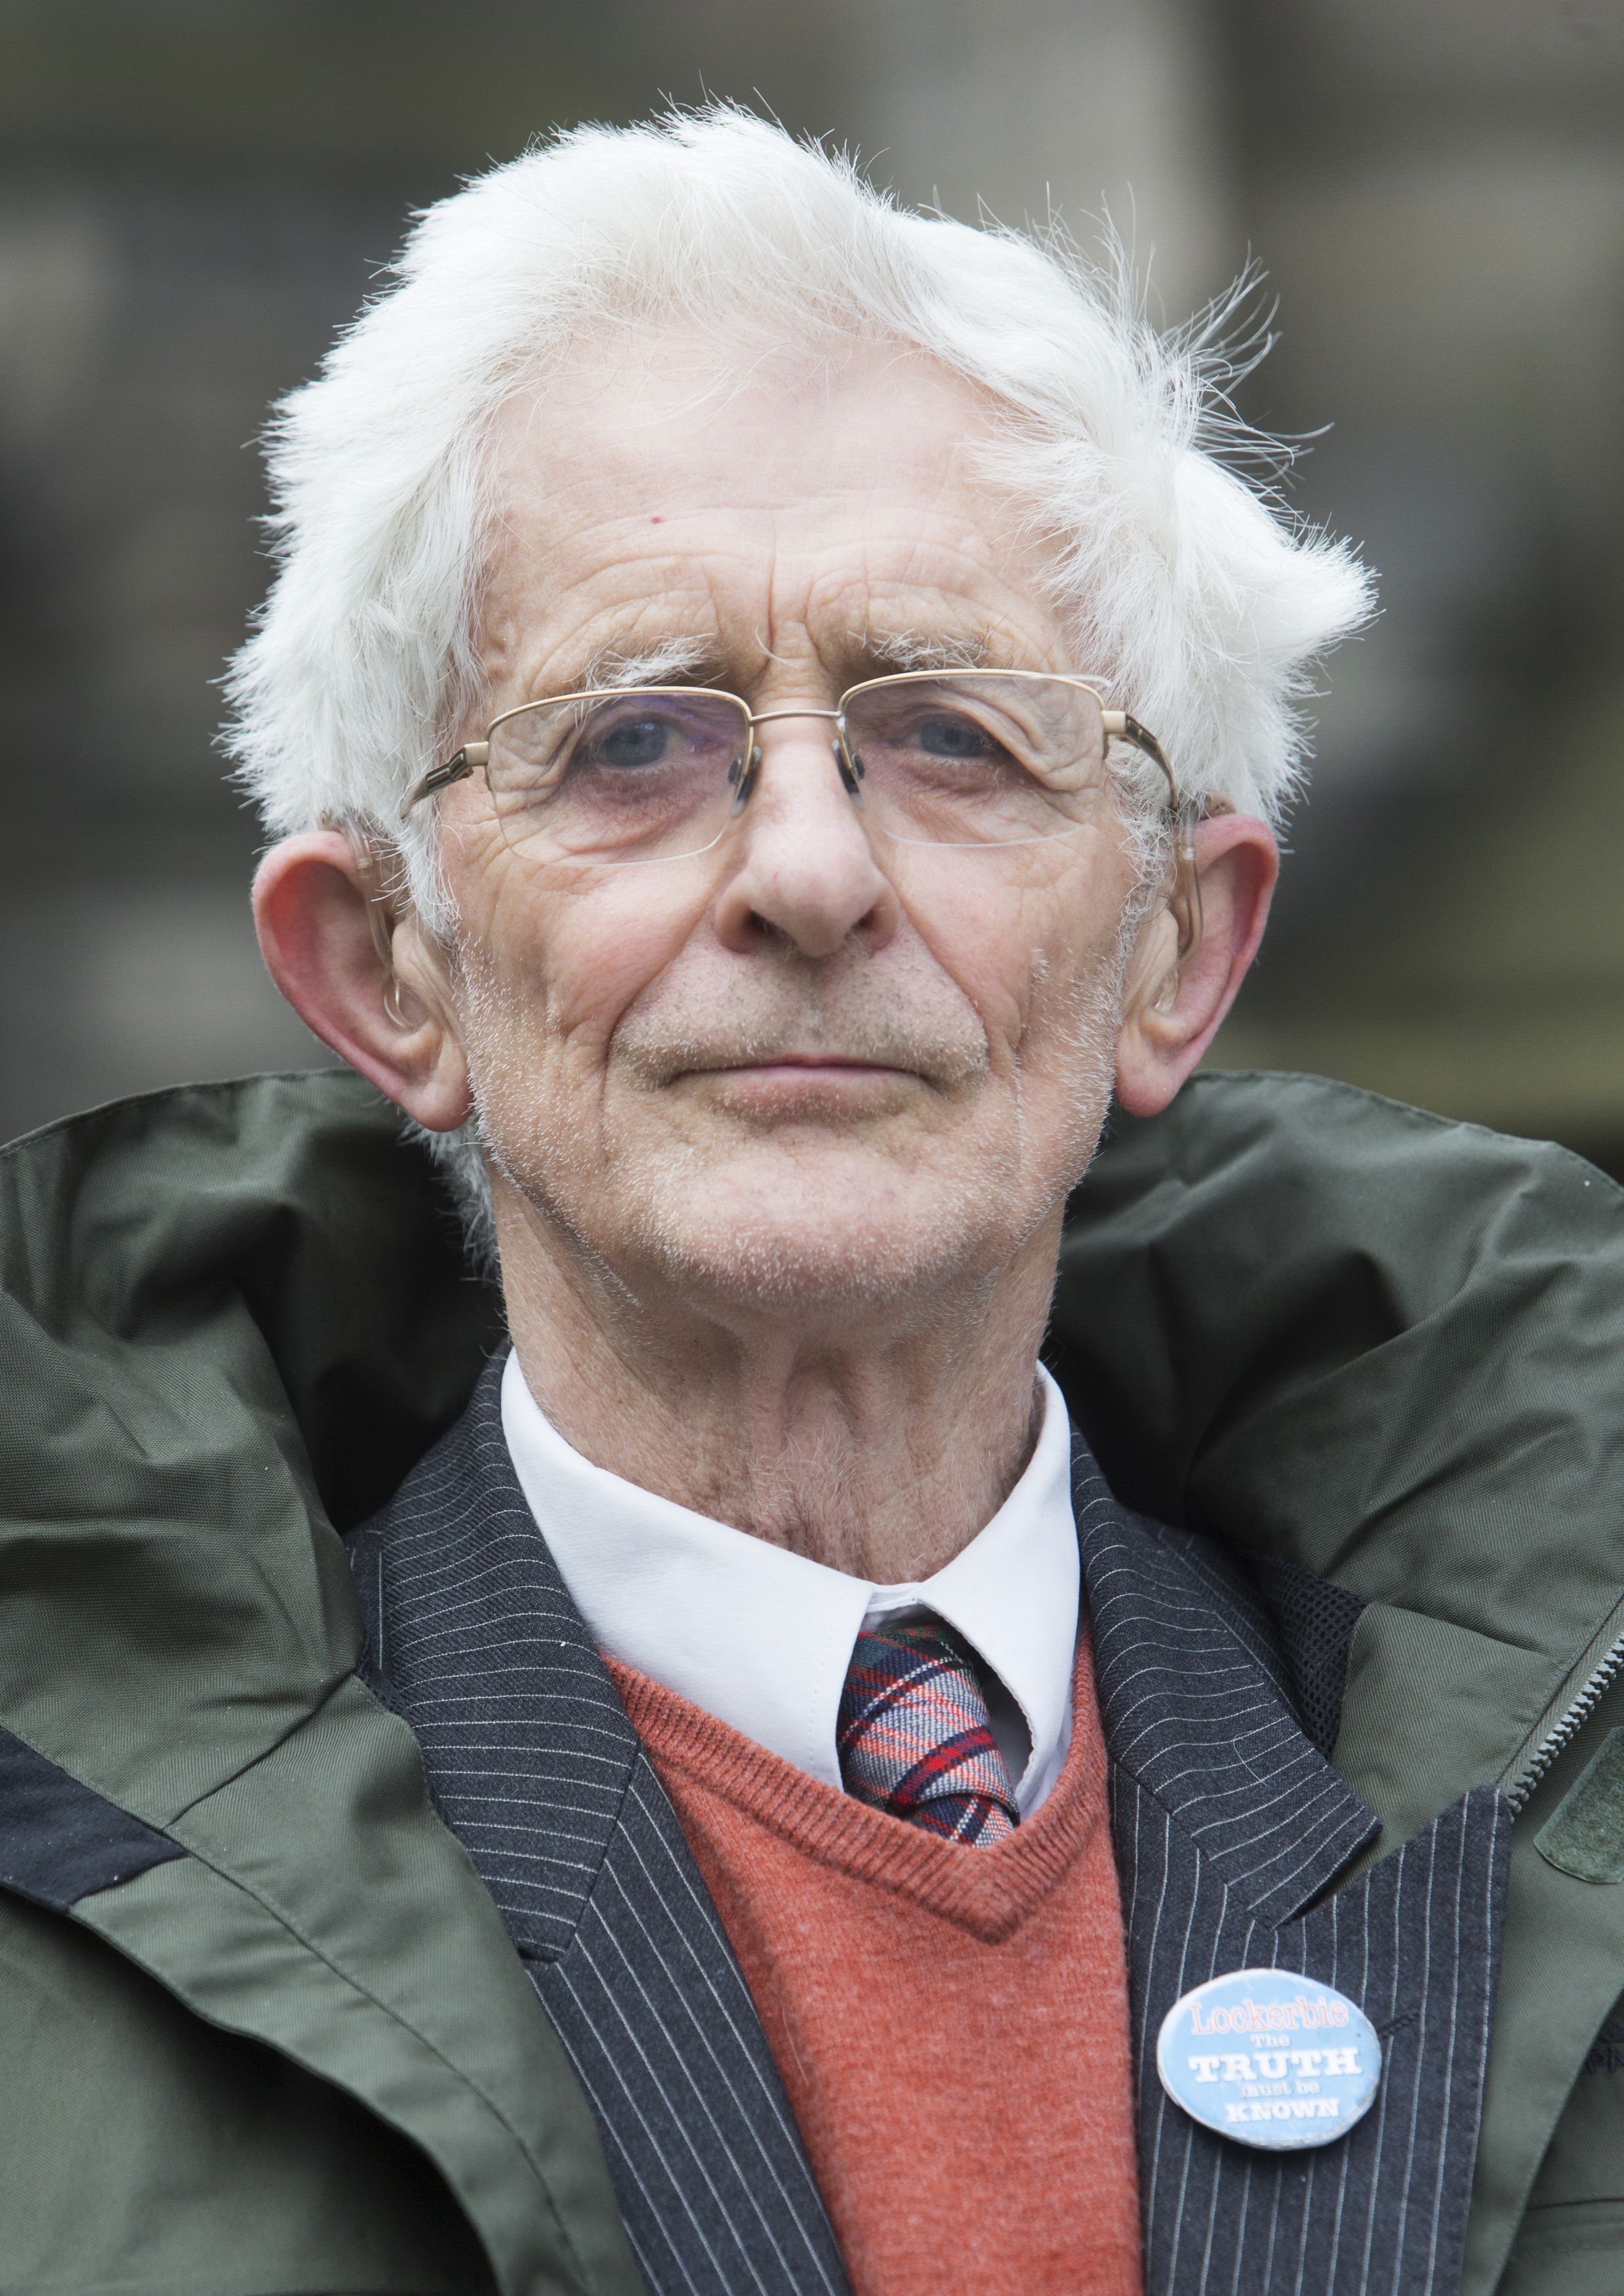 Dr Jim Swire, the father of Flora Swire who died in the bombing of Pan Am Flight 103 over Lockerbie in 1988, as he arrivea at the High Court of Justiciary in Edinburgh.